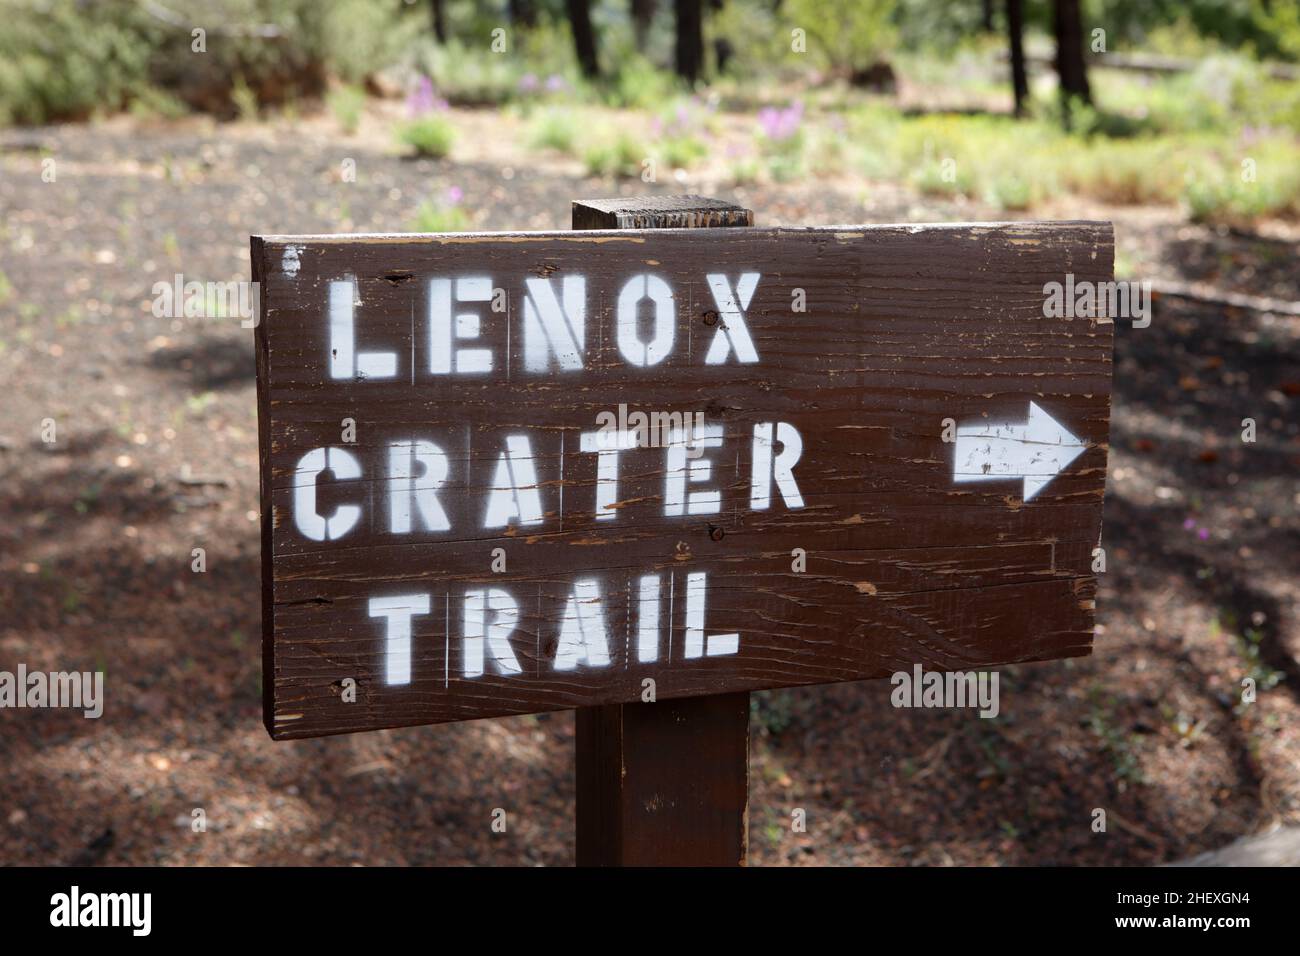 Lenox Crater hiking trail sign in the Sunset Crater Volcano National Monument, Arizona, USA Stock Photo